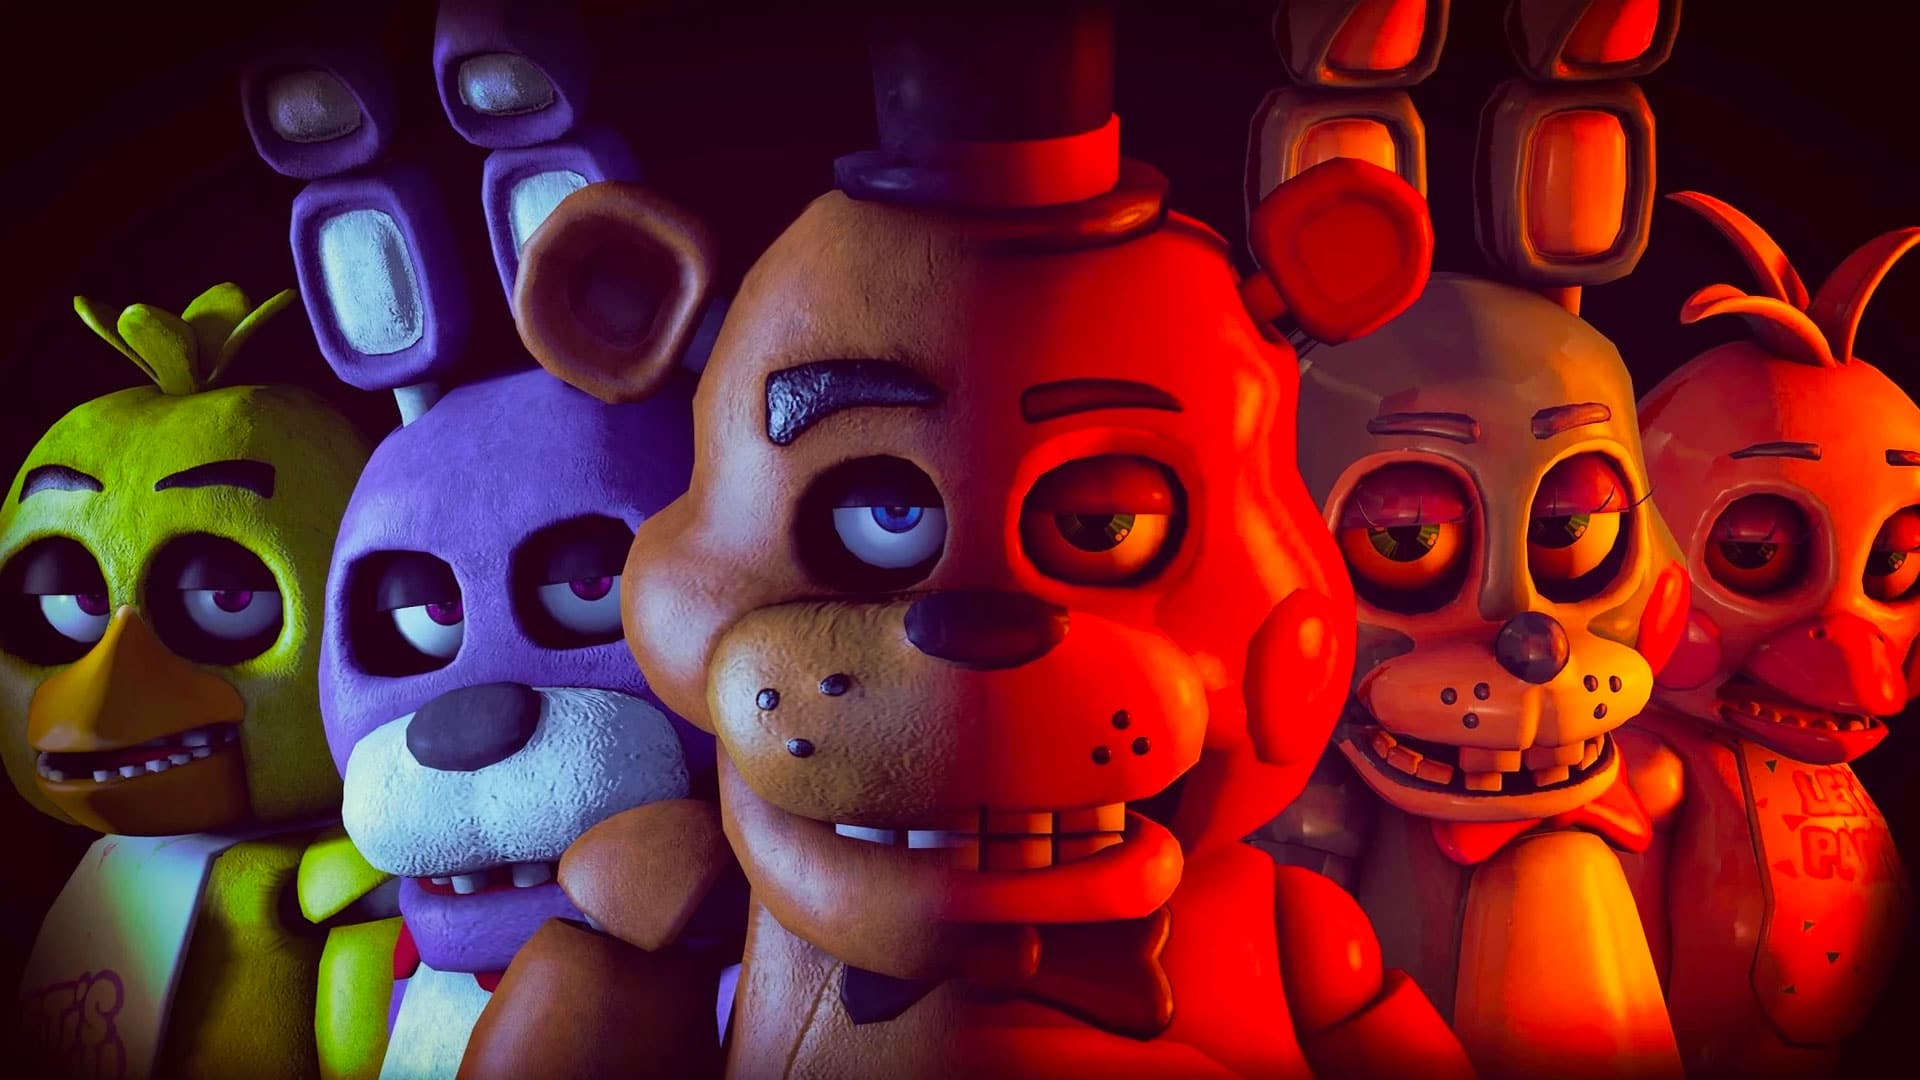 Five Nights At Freddy's 1 (From Five Nights At Freddy's) 